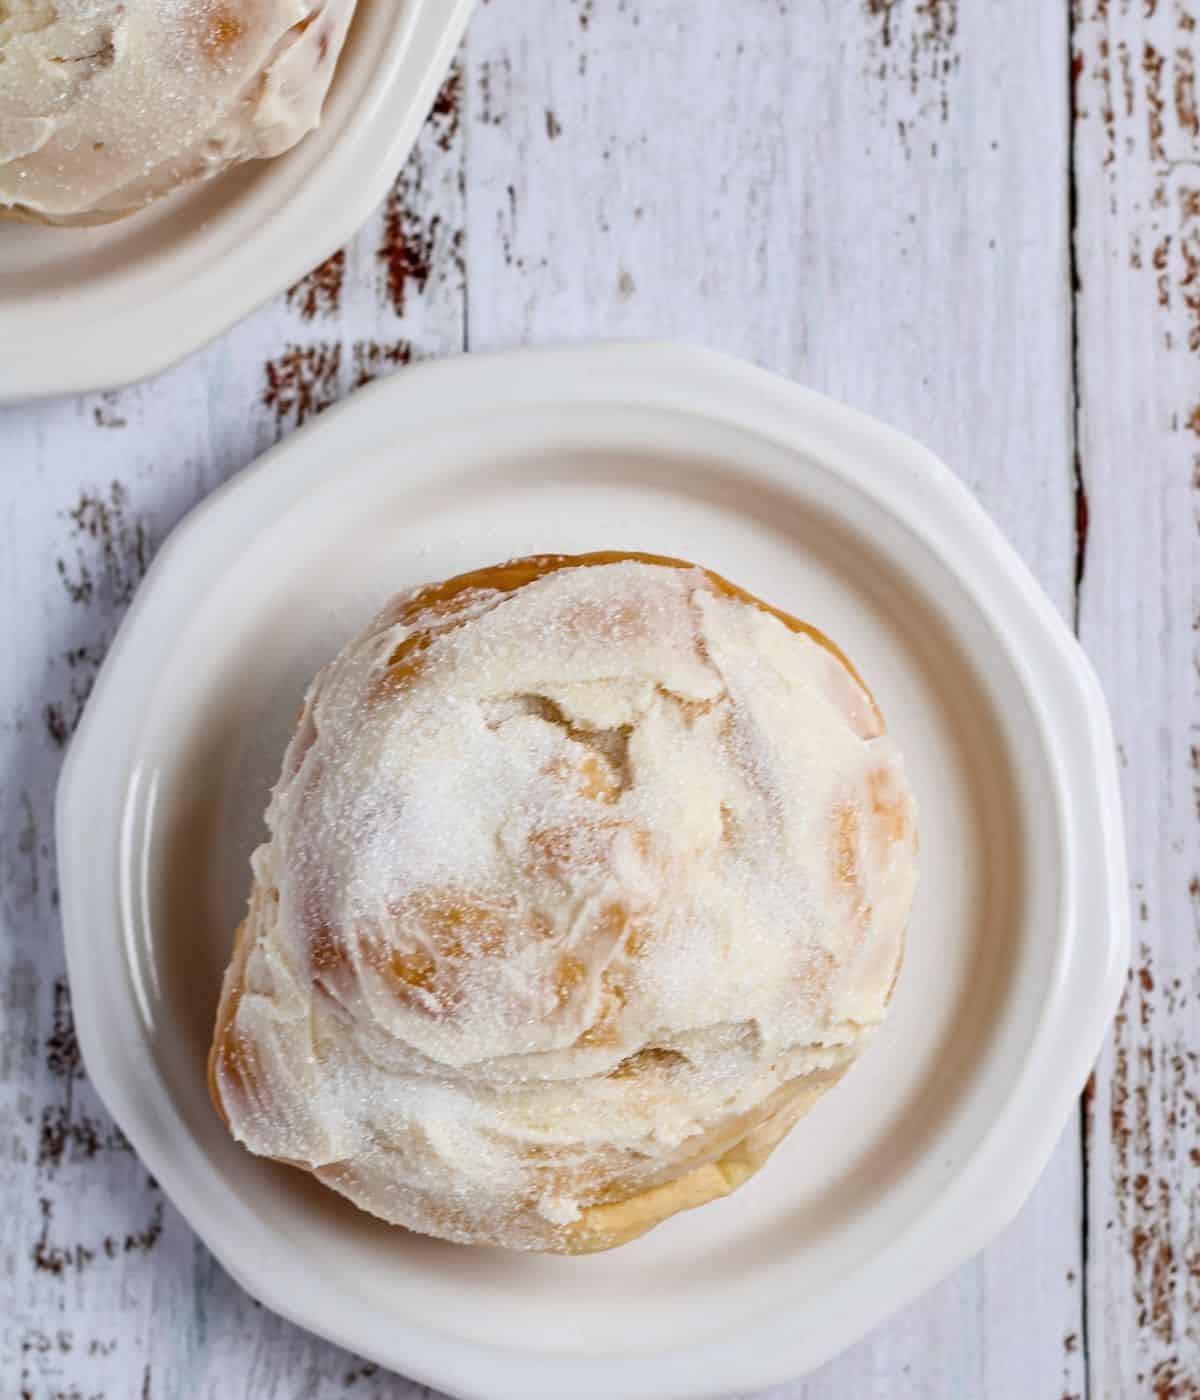 Baked ensaymada on a plate with butter and sugar.